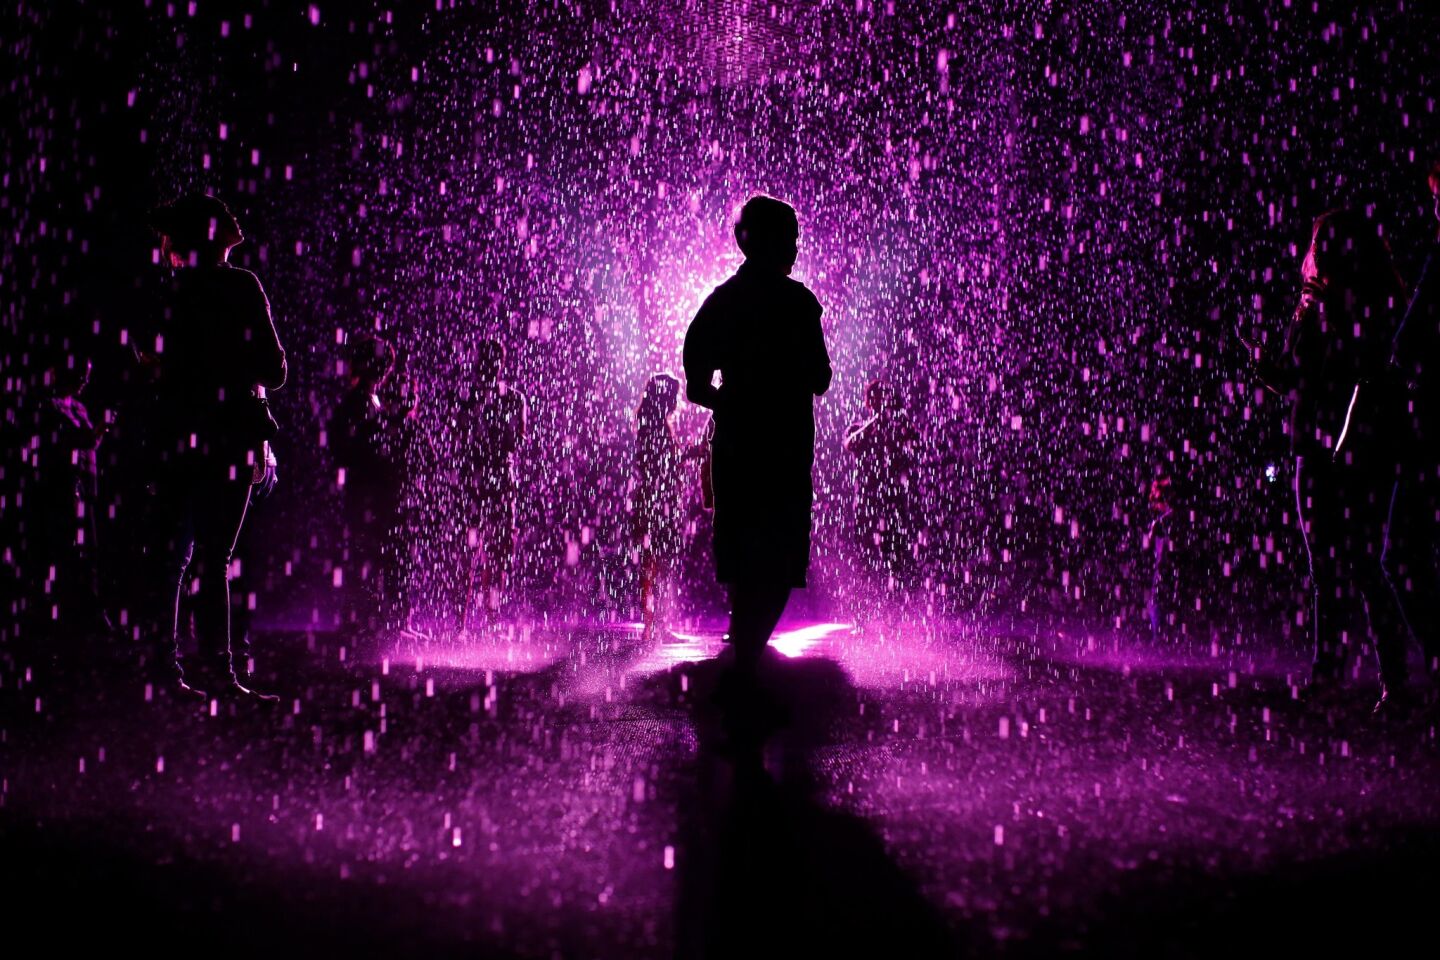 The Los Angeles County Museum of Art made it rain purple in honor of Prince on Friday.